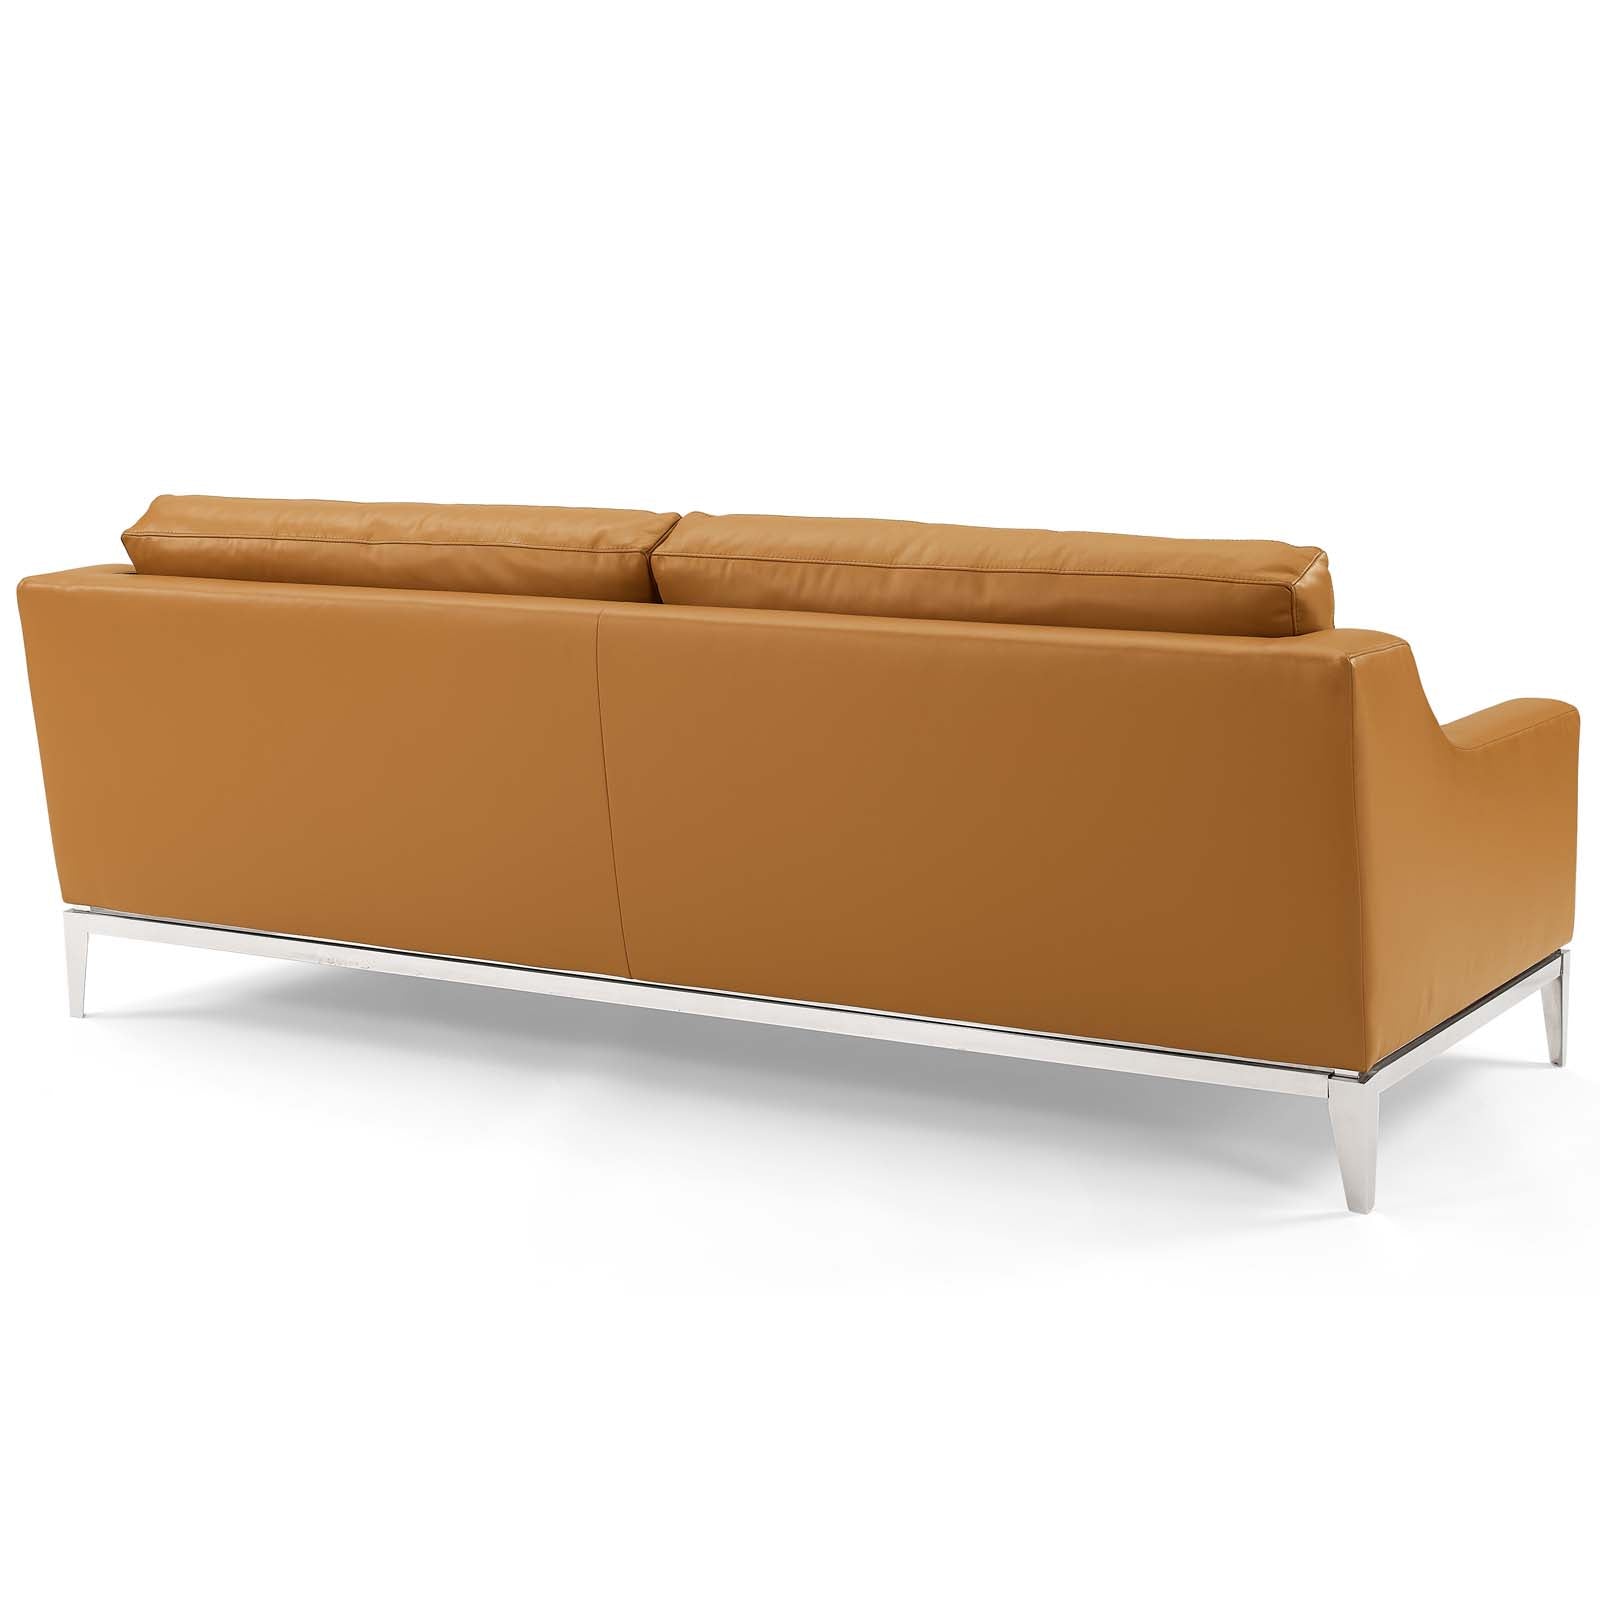 Modway Sofas & Couches - Harness-Stainless-Steel-Base-Leather-Sofa-&-Armchair-Set-Tan